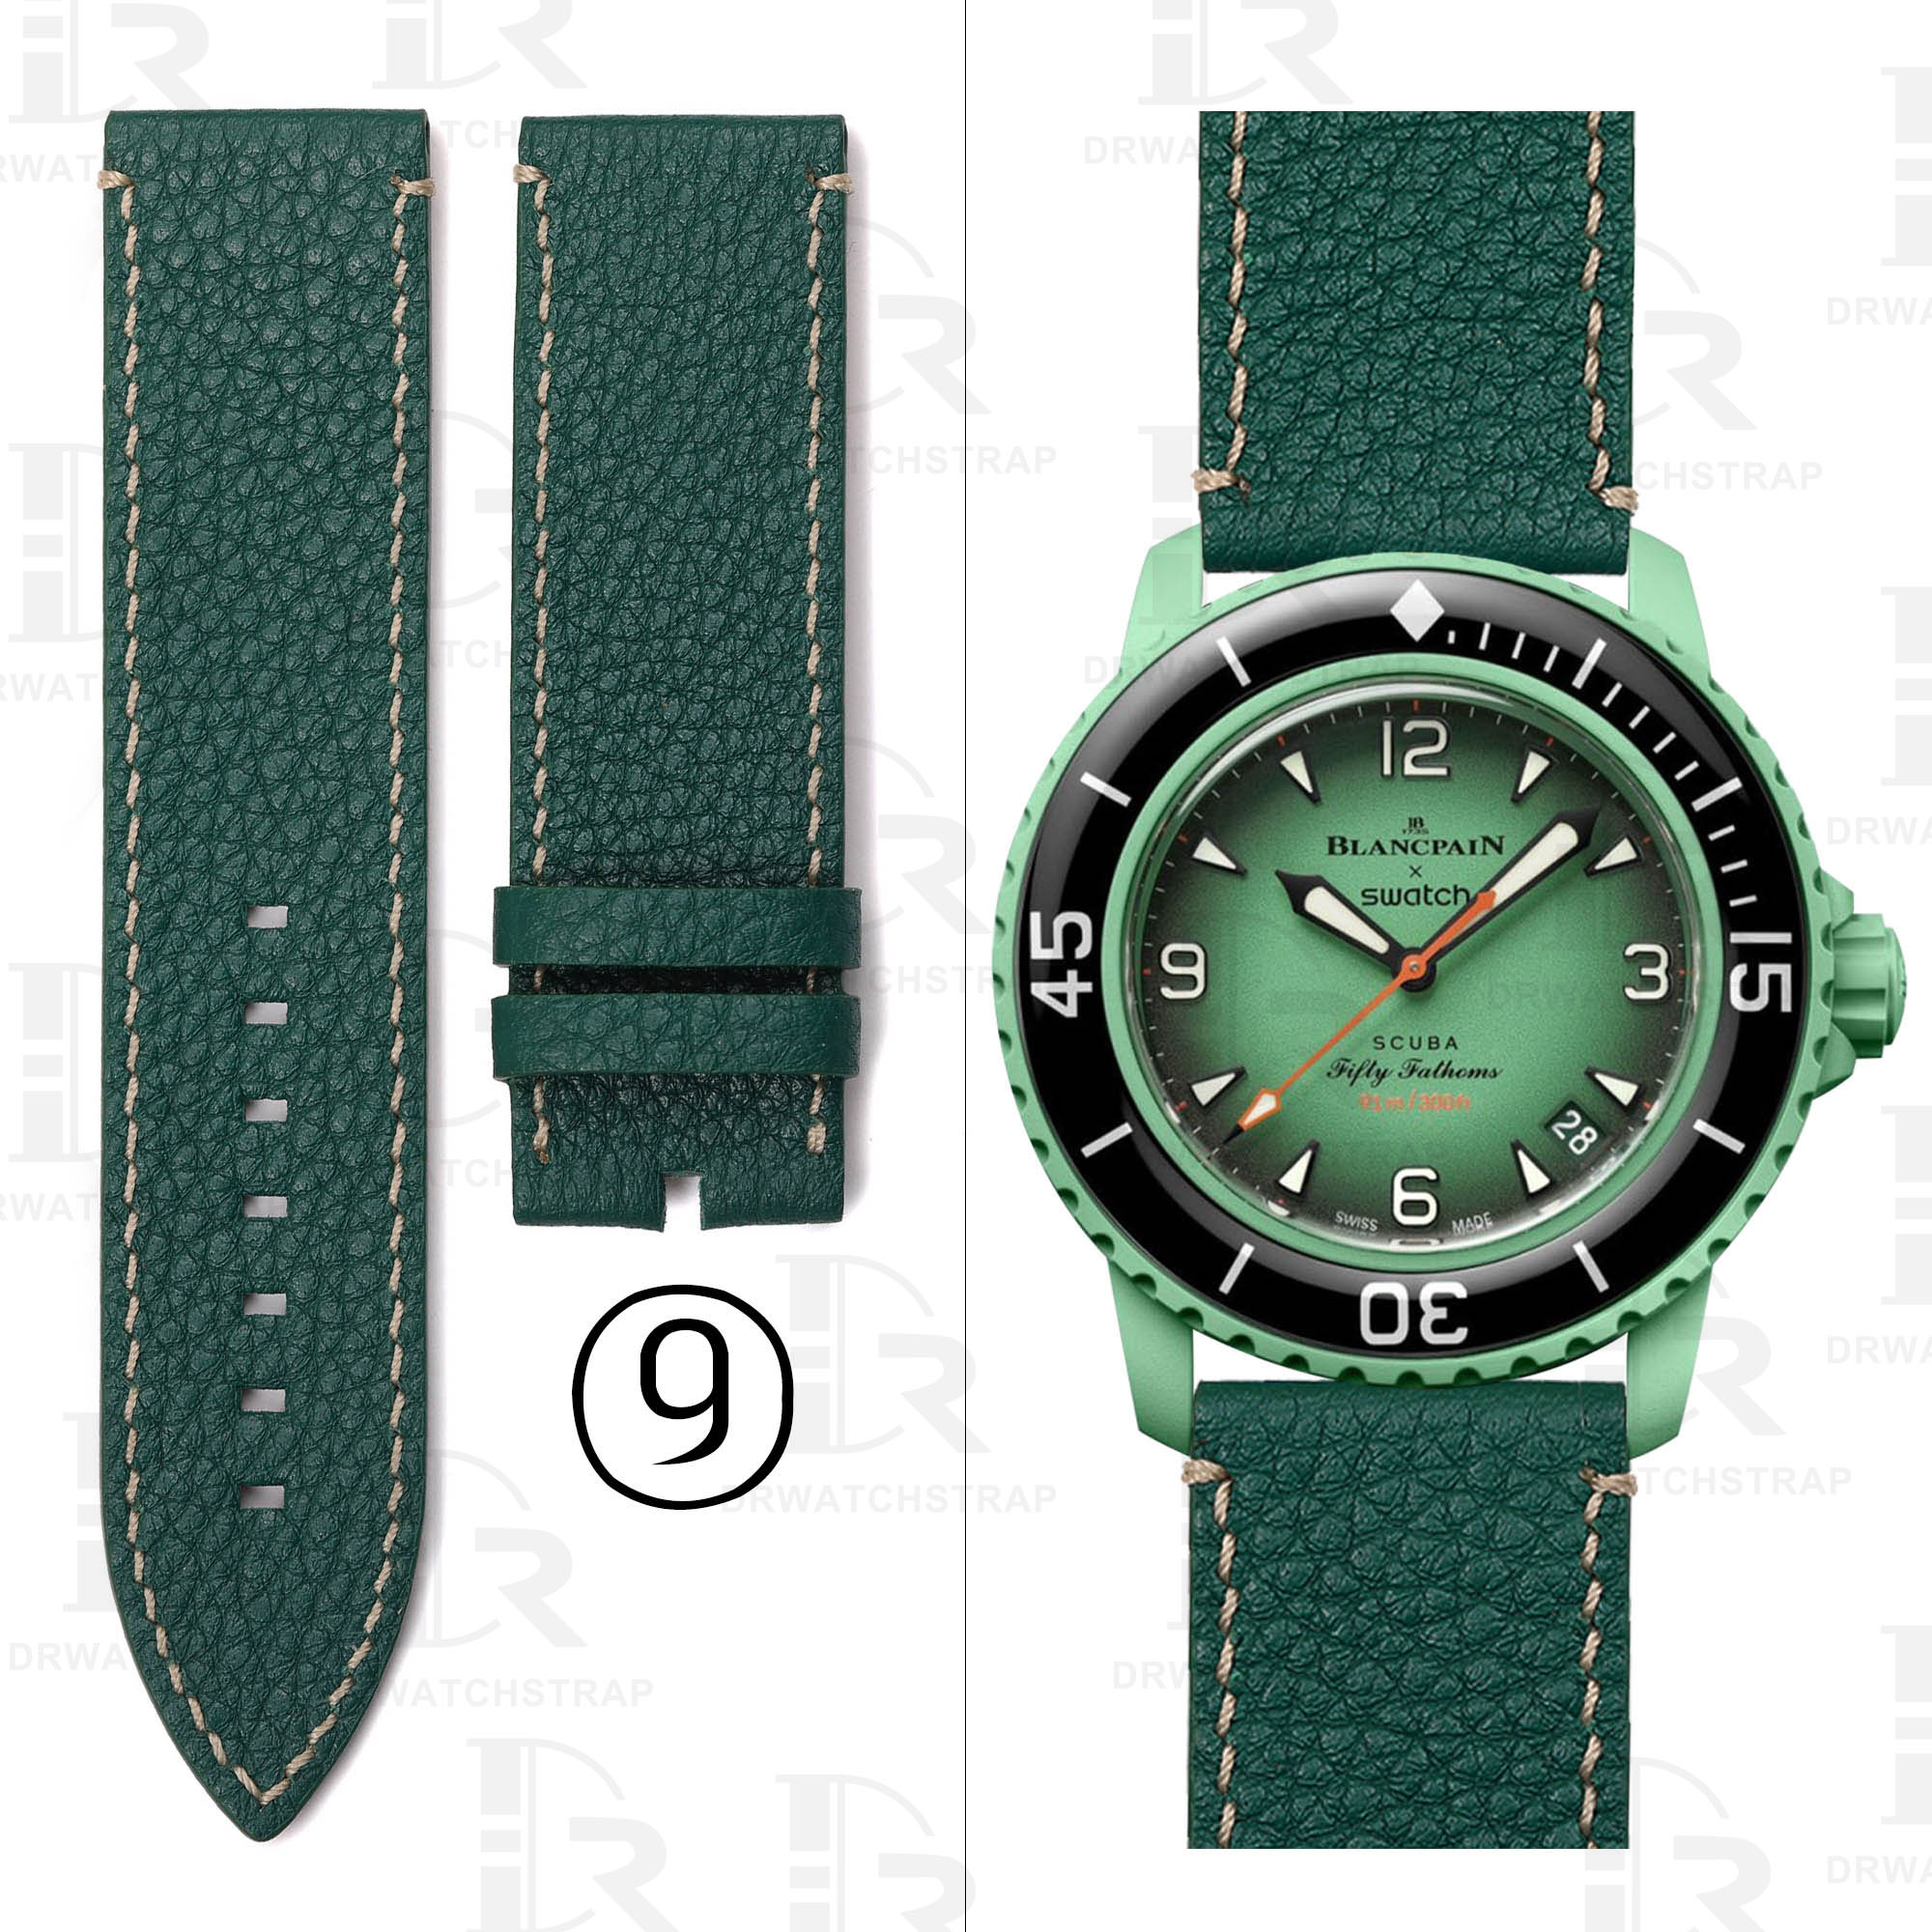 Buy Custom Blancpain x Swatch leather strap 22mm Green Calfskin leather watch straps (2)